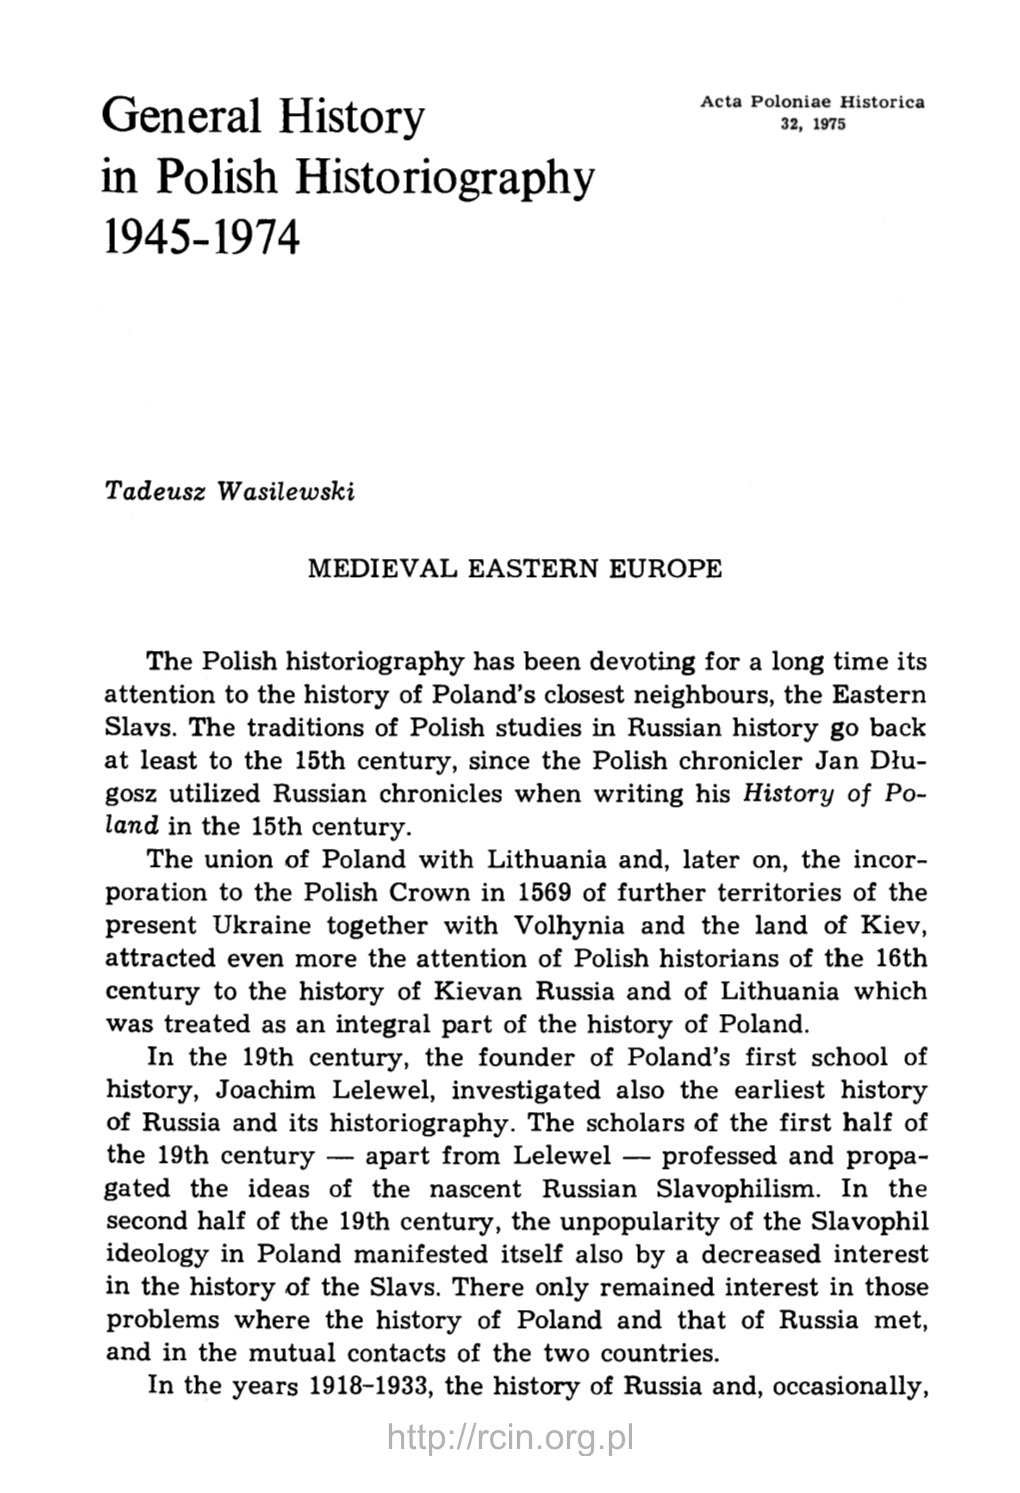 General History in Polish Historiography 1945-1974